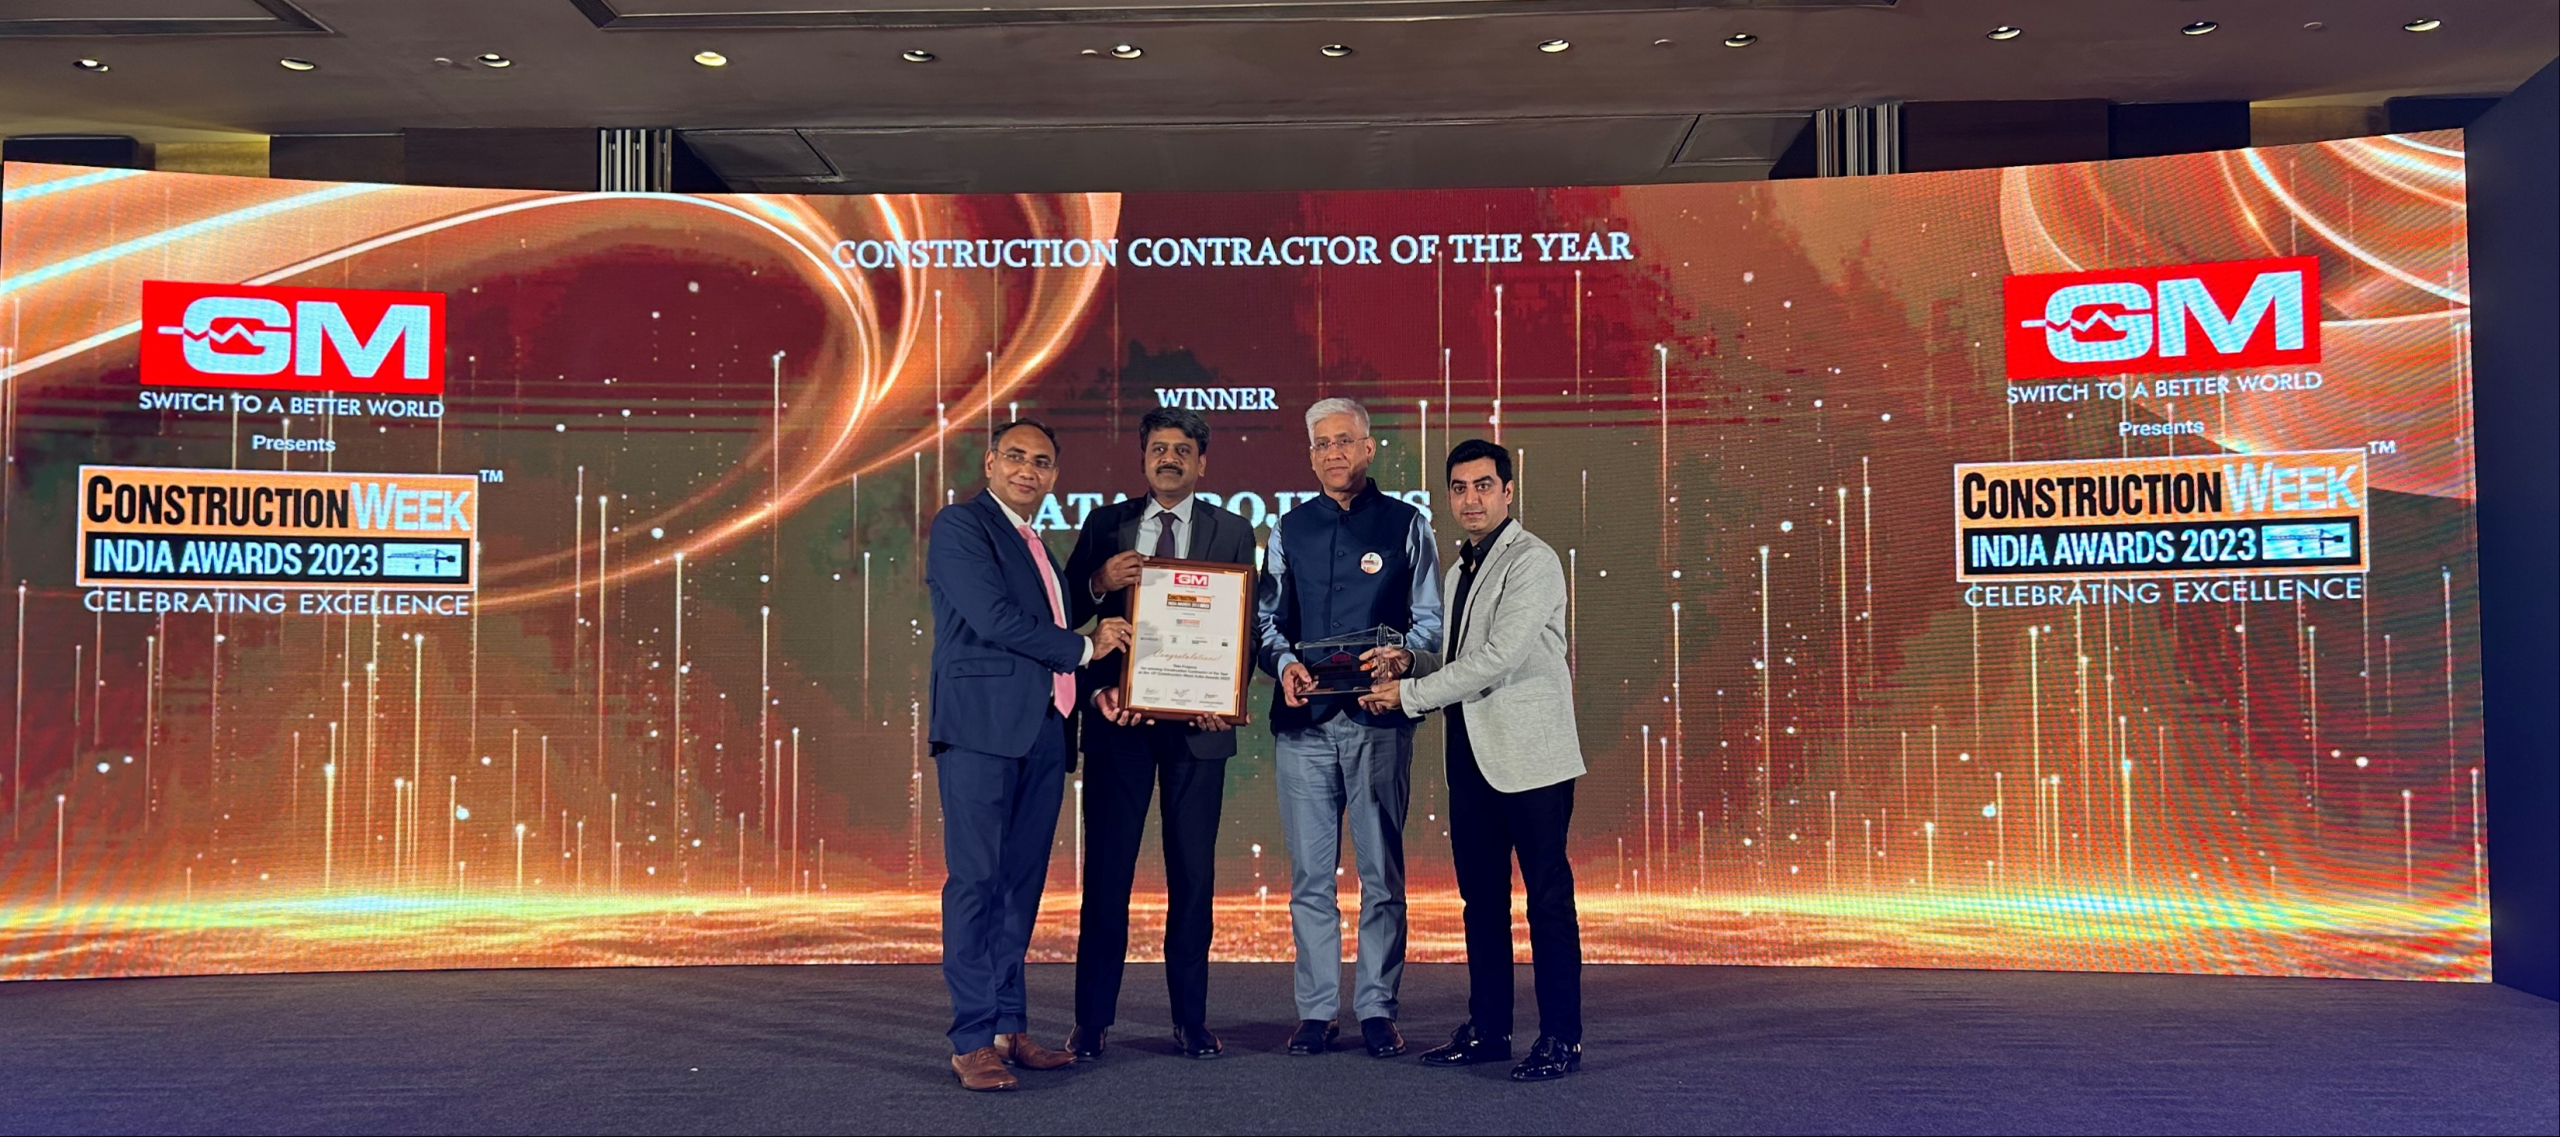 Construction Contractor of the year 2023 by Construction Week India